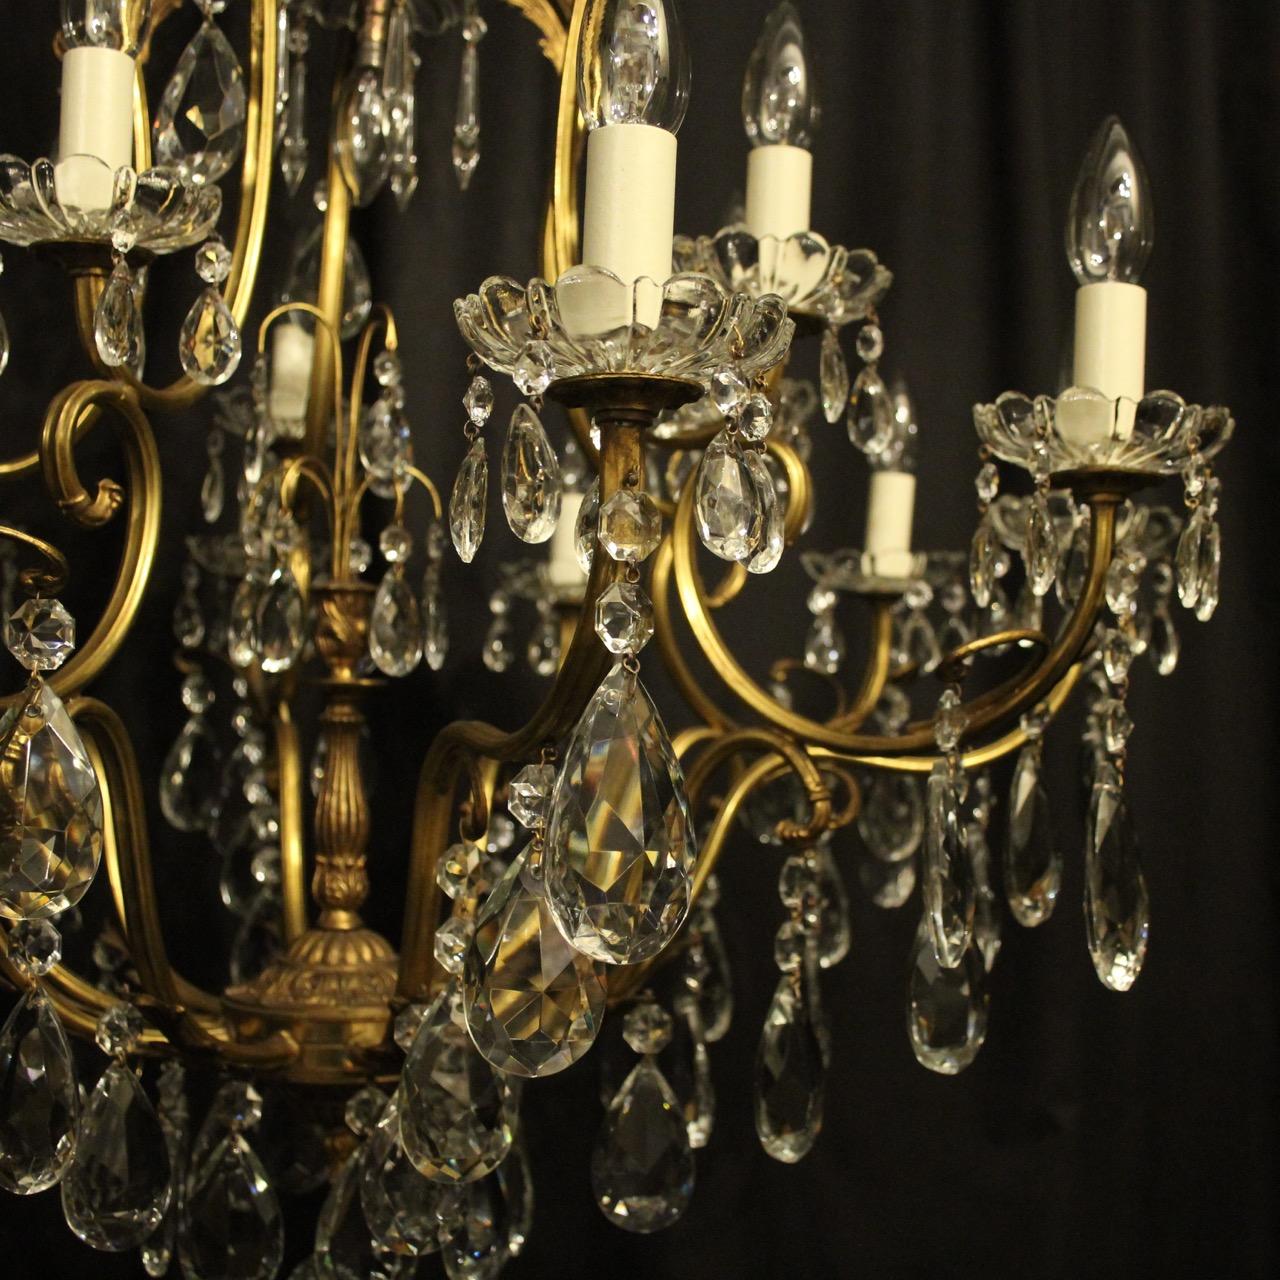 A French gilded brass and crystal 16-light birdcage form antique chandelier, the fifteen tiered leaf clad scrolling arms with glass bobeche drip pans, issuing from a foliated cage form interior with a single inverted light fitting and wirework